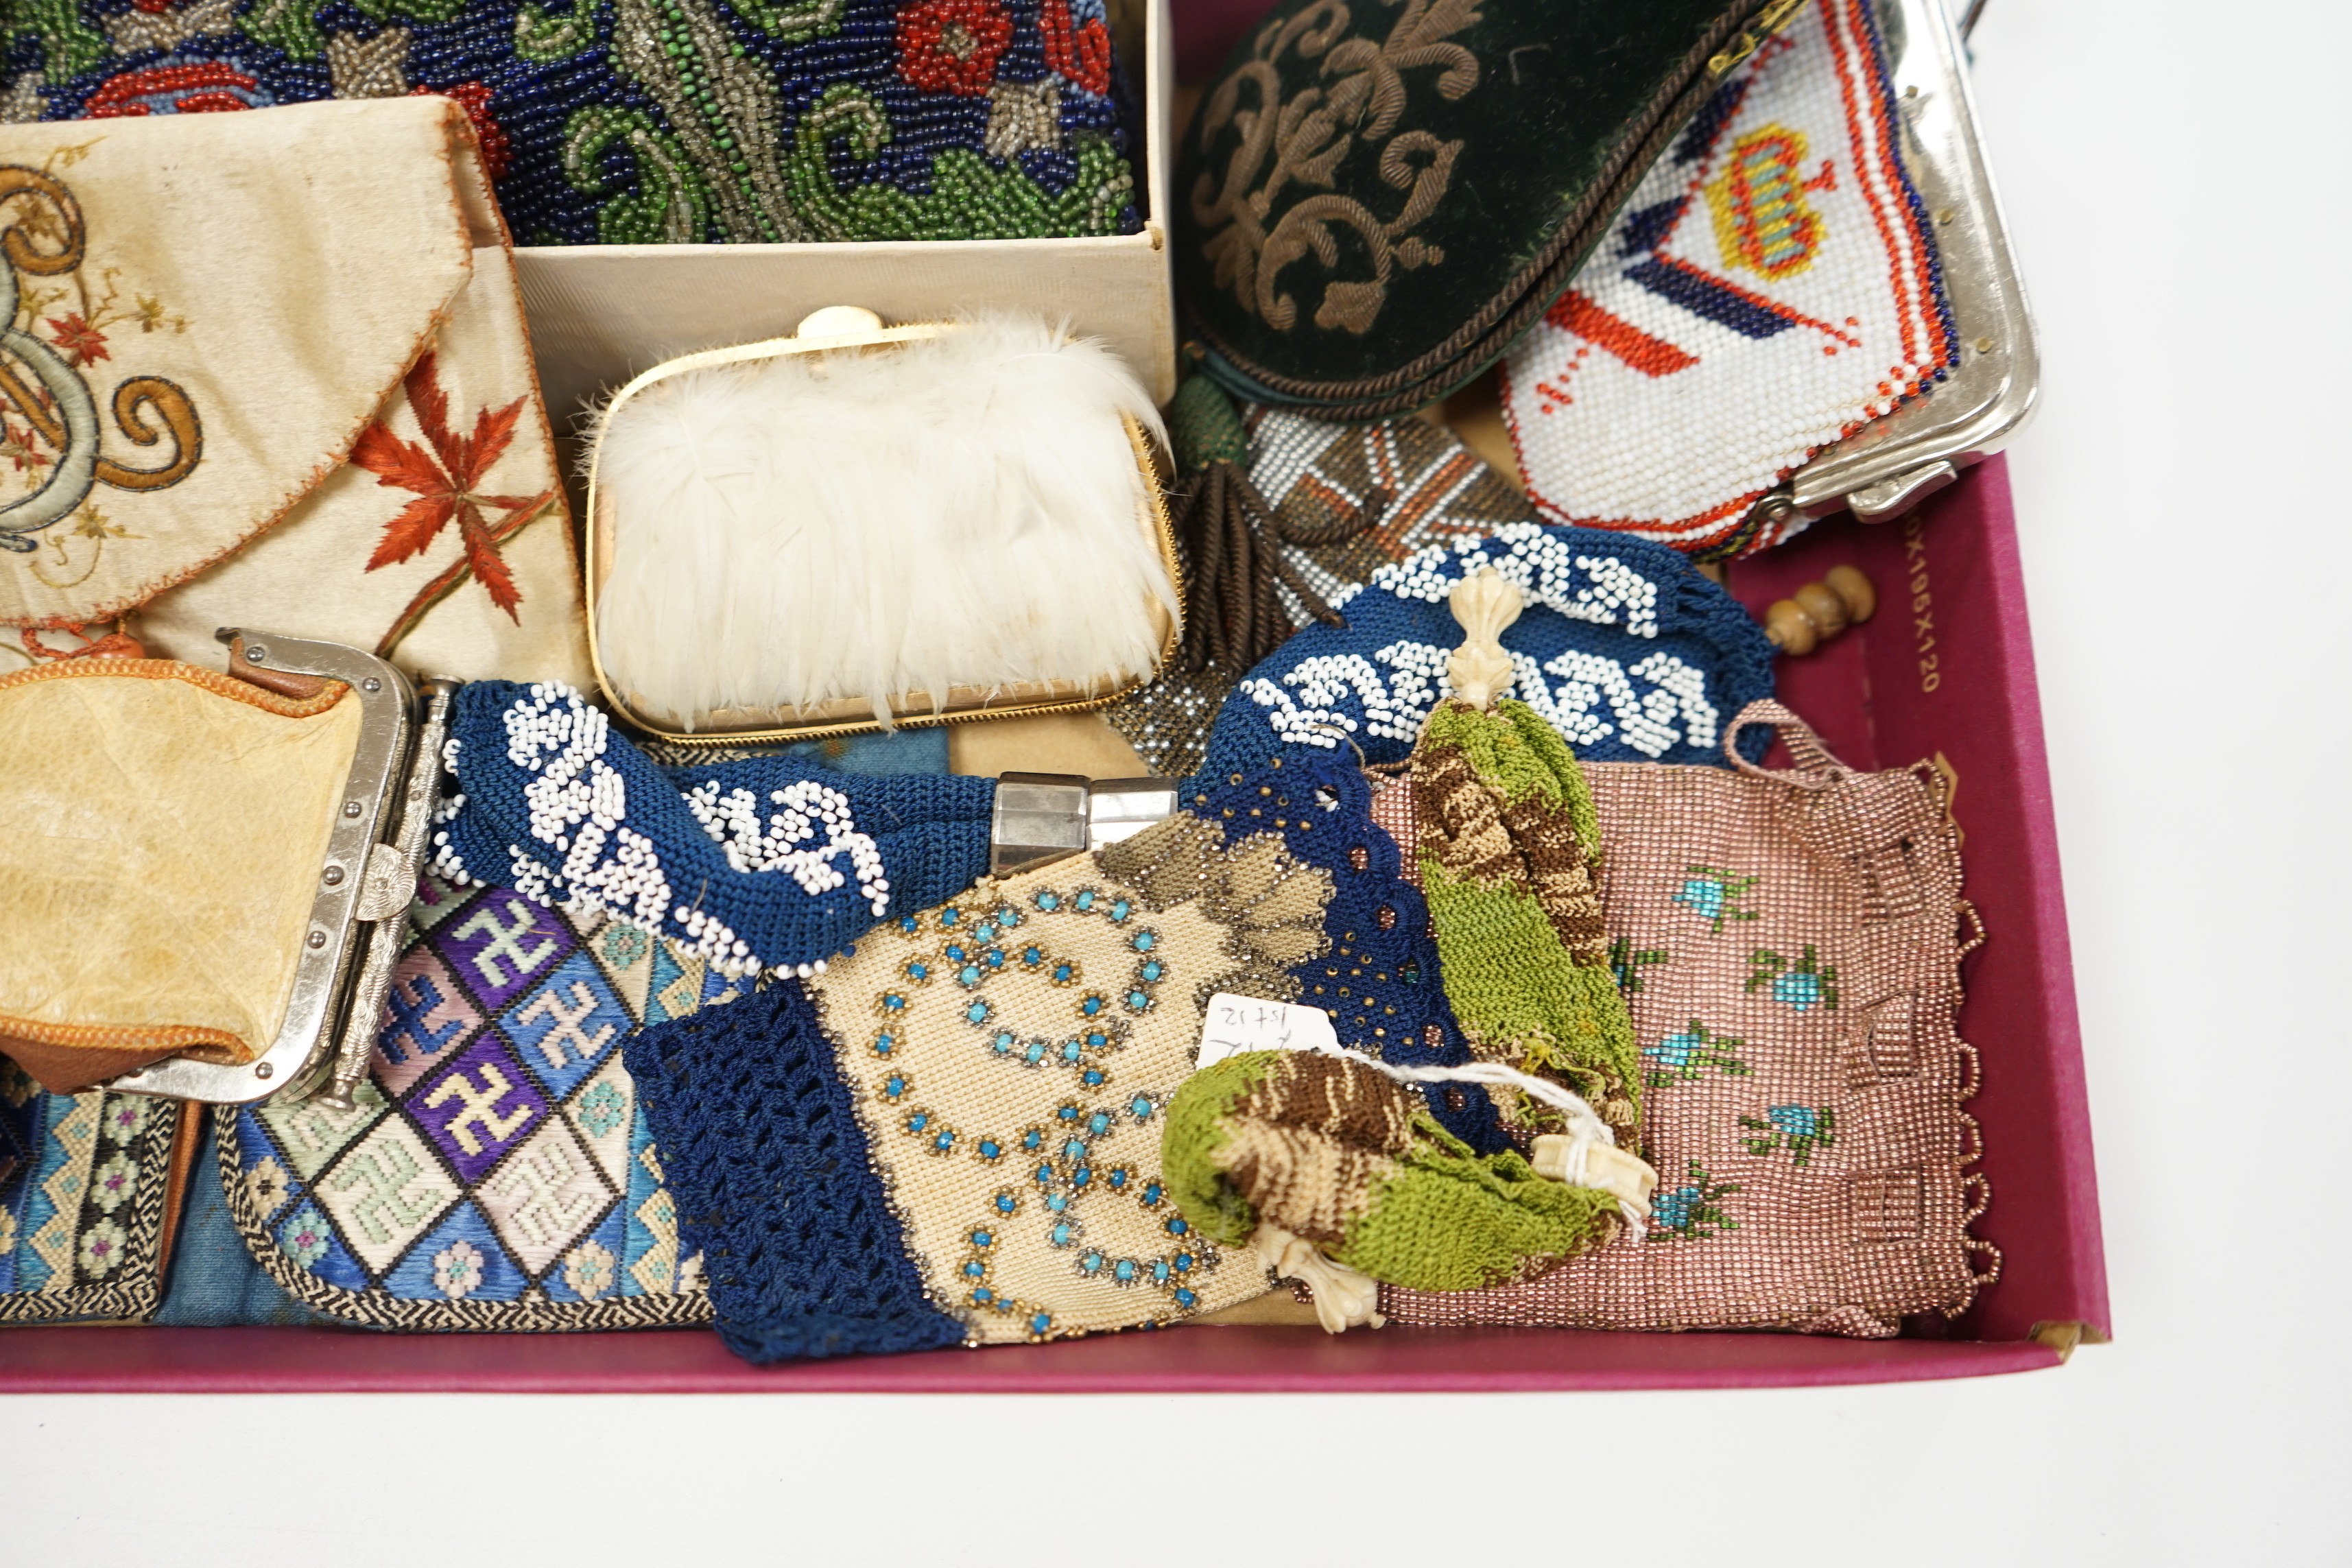 A velvet and metal embroidered reticule possibly 18th century, together with a collection of beaded embroidered knitted and leather purses, bags misers purses and a feather coin purse(14)